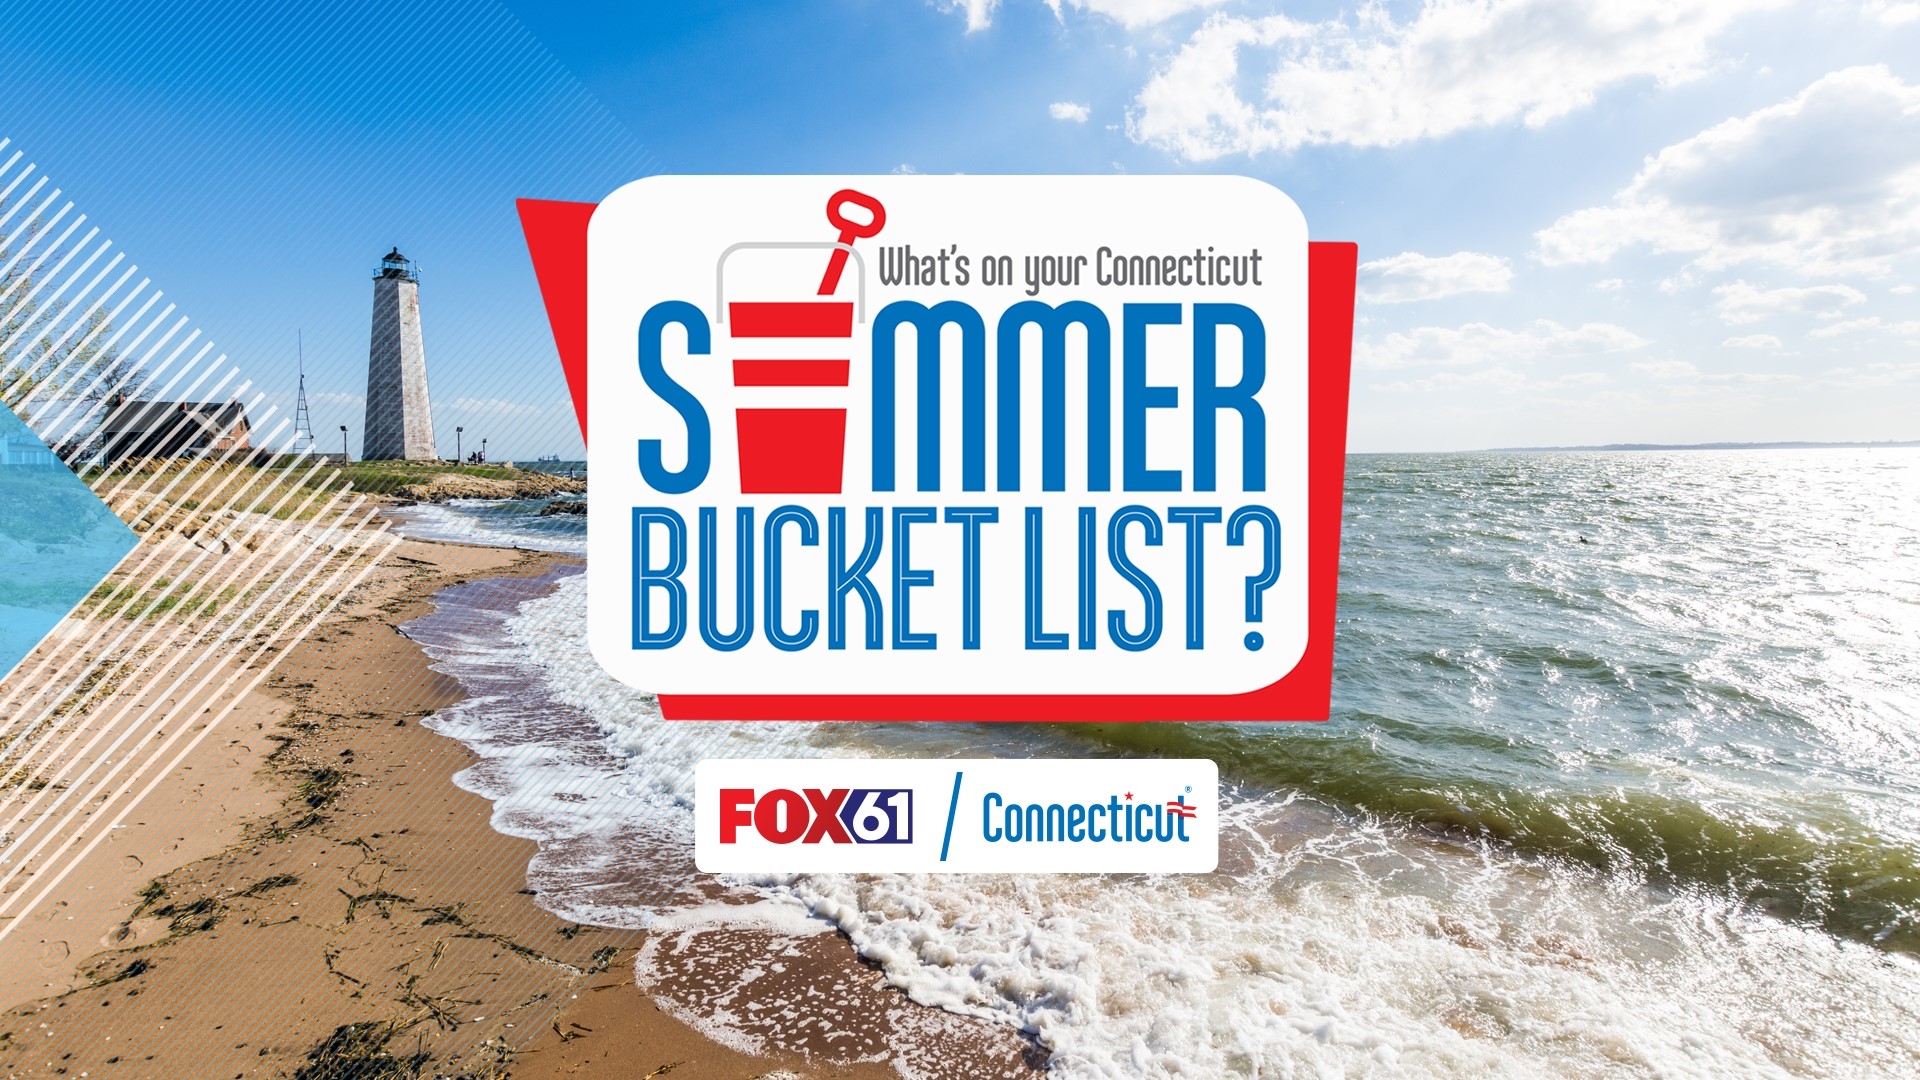 FOX61's Keith McGilvery and Rachel Piscitelli are wrapping up another edition of Bucket List for summer 2022.